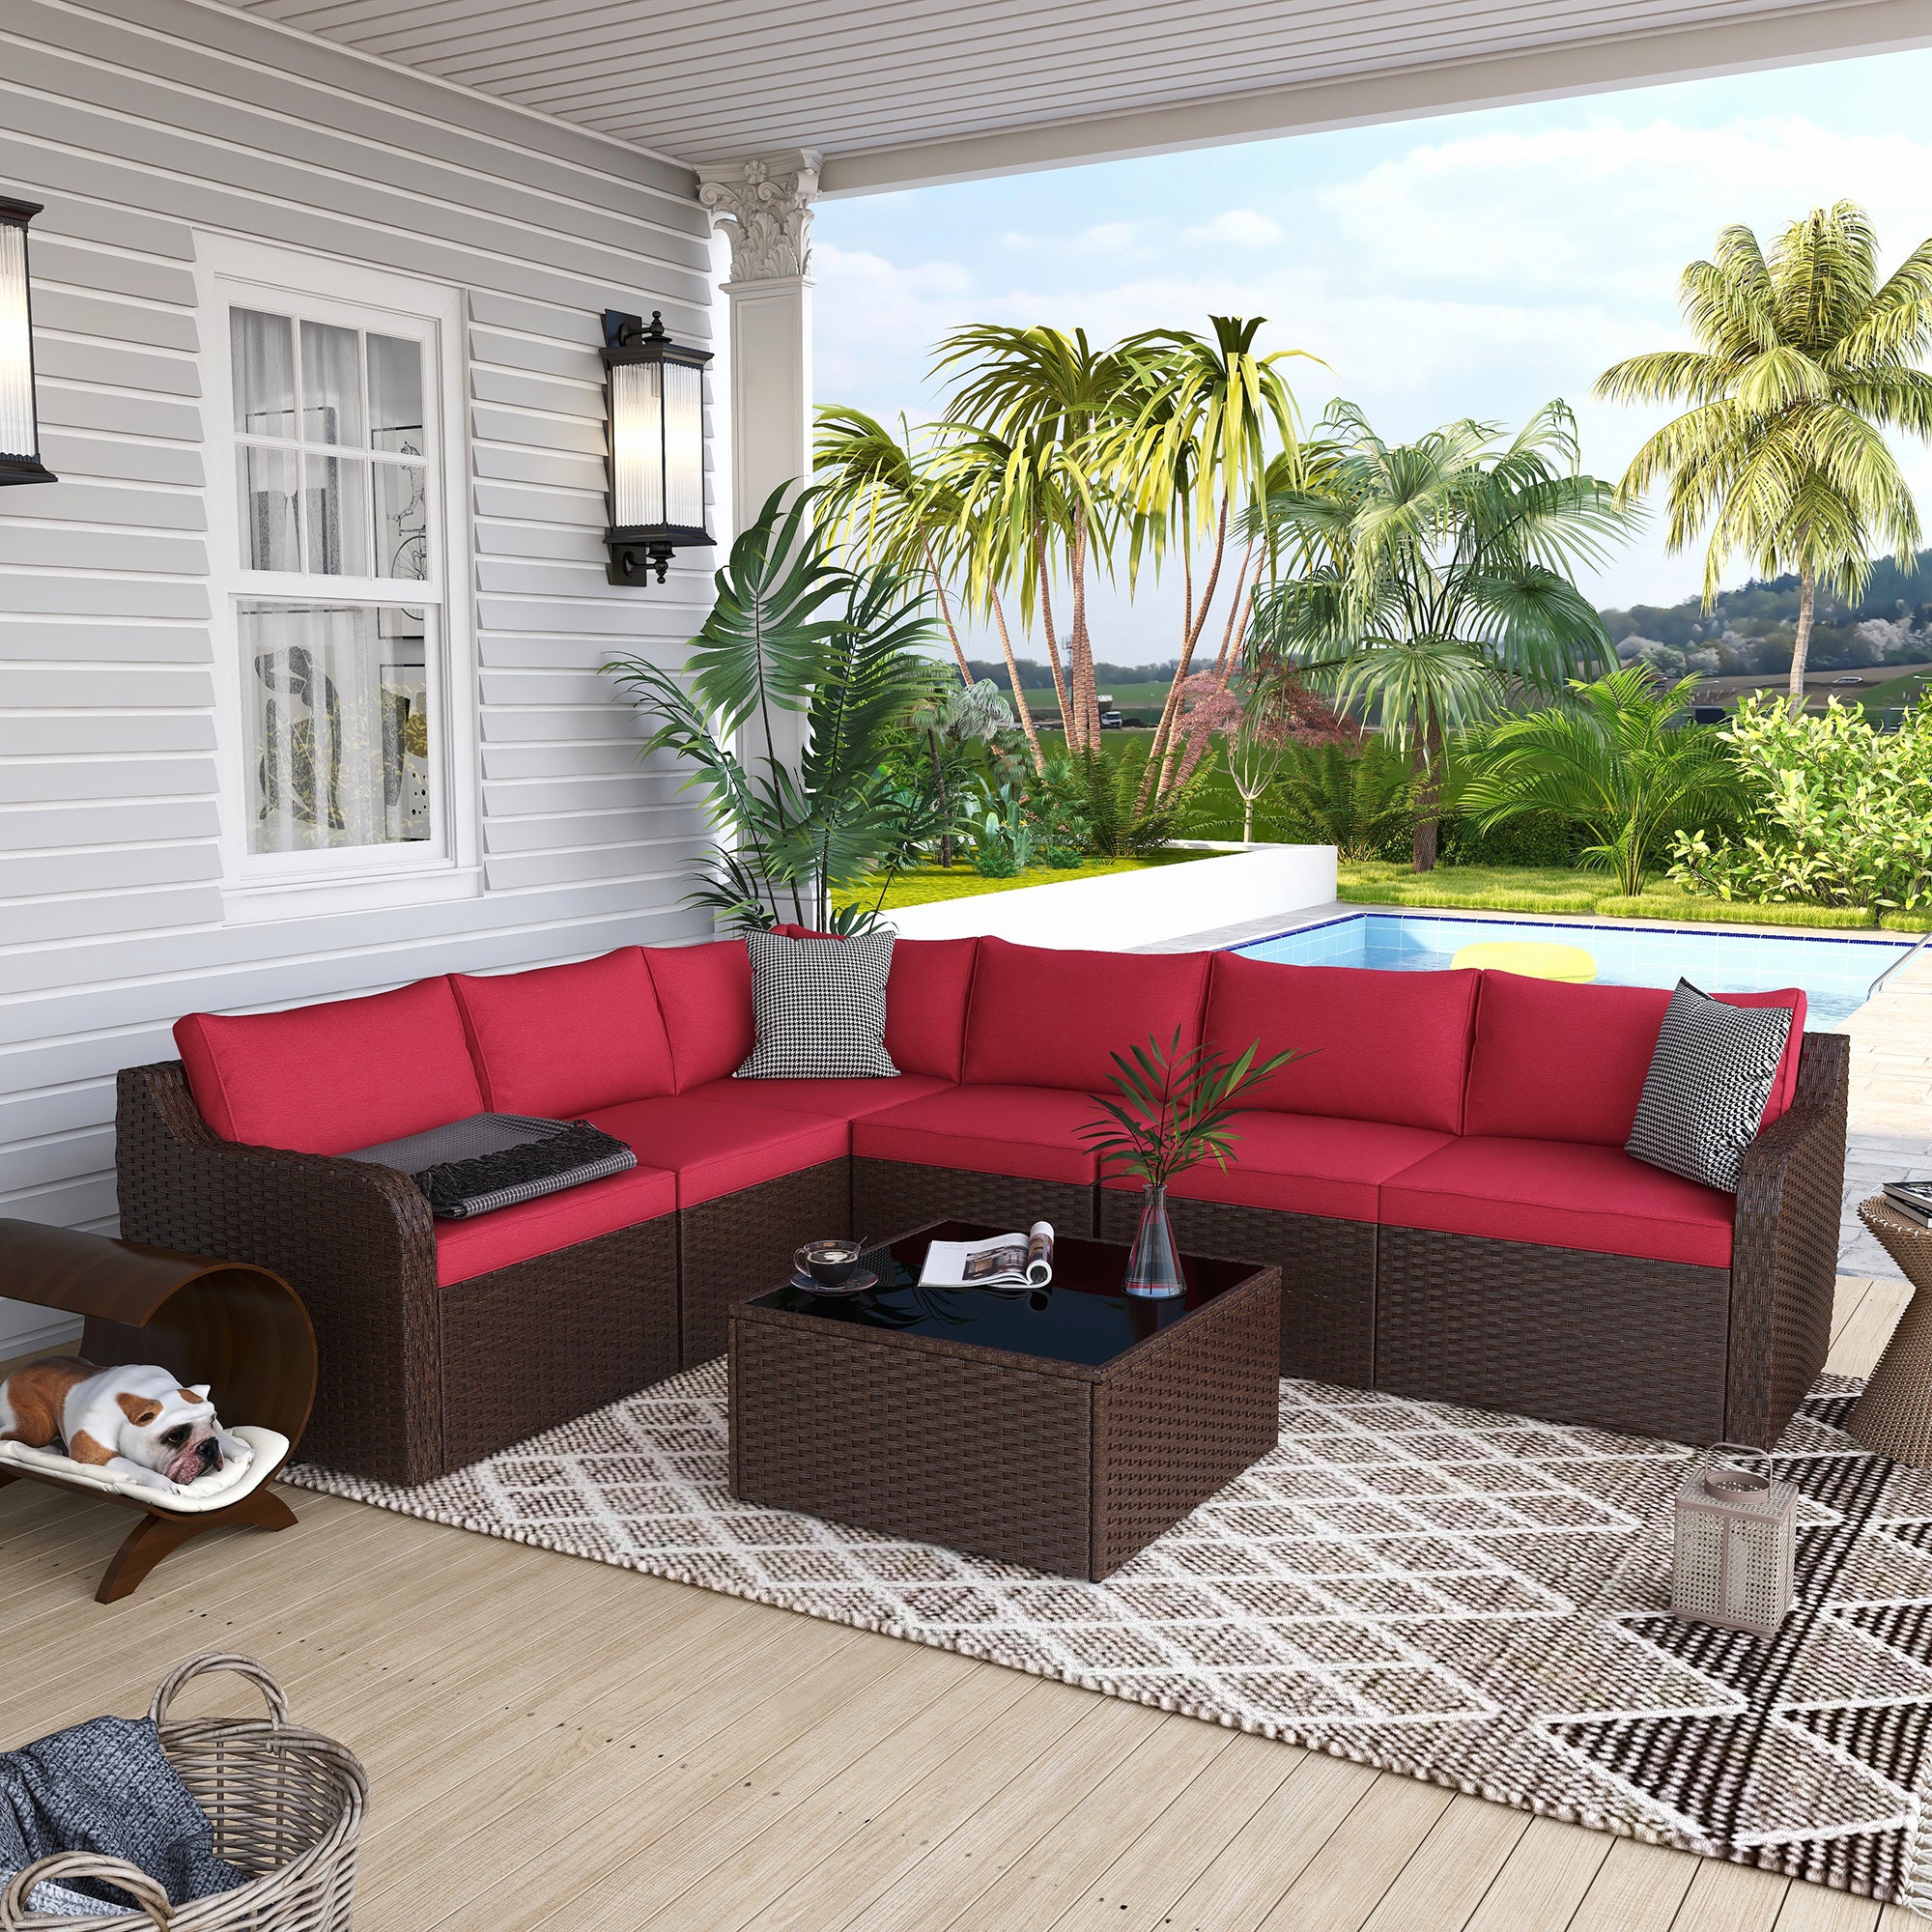 7-pcs-patio-rattan-sectional-sofa-set-w-ergonomic-curved-armrest-red-cushion-glass-table